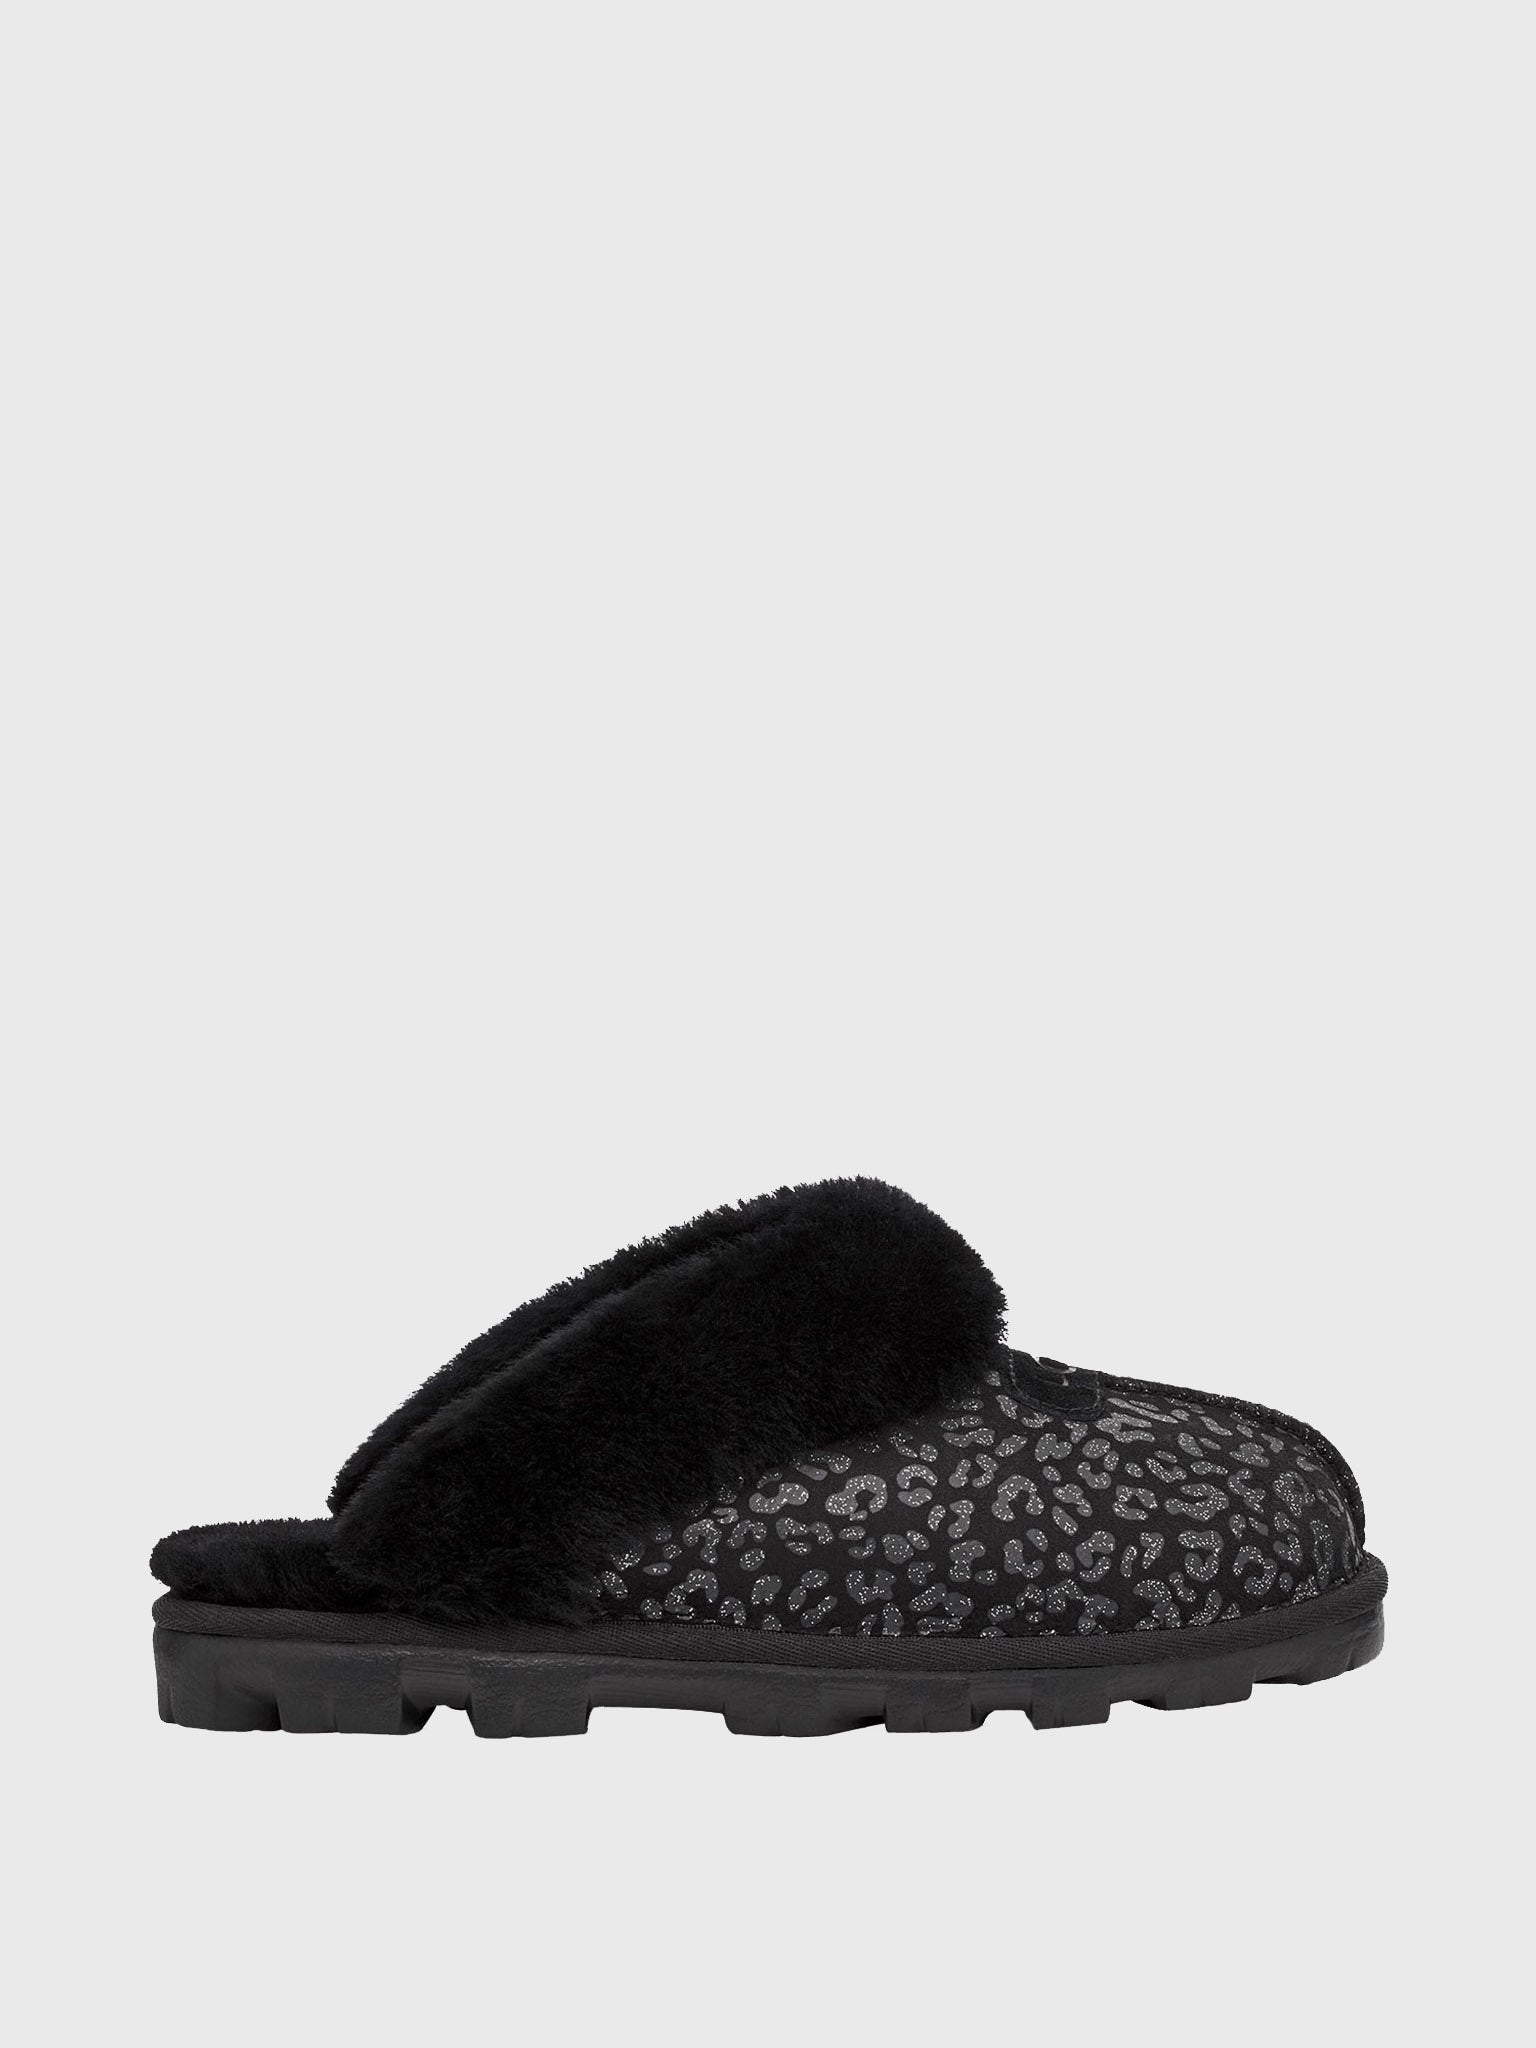 ugg women's coquette slippers sale